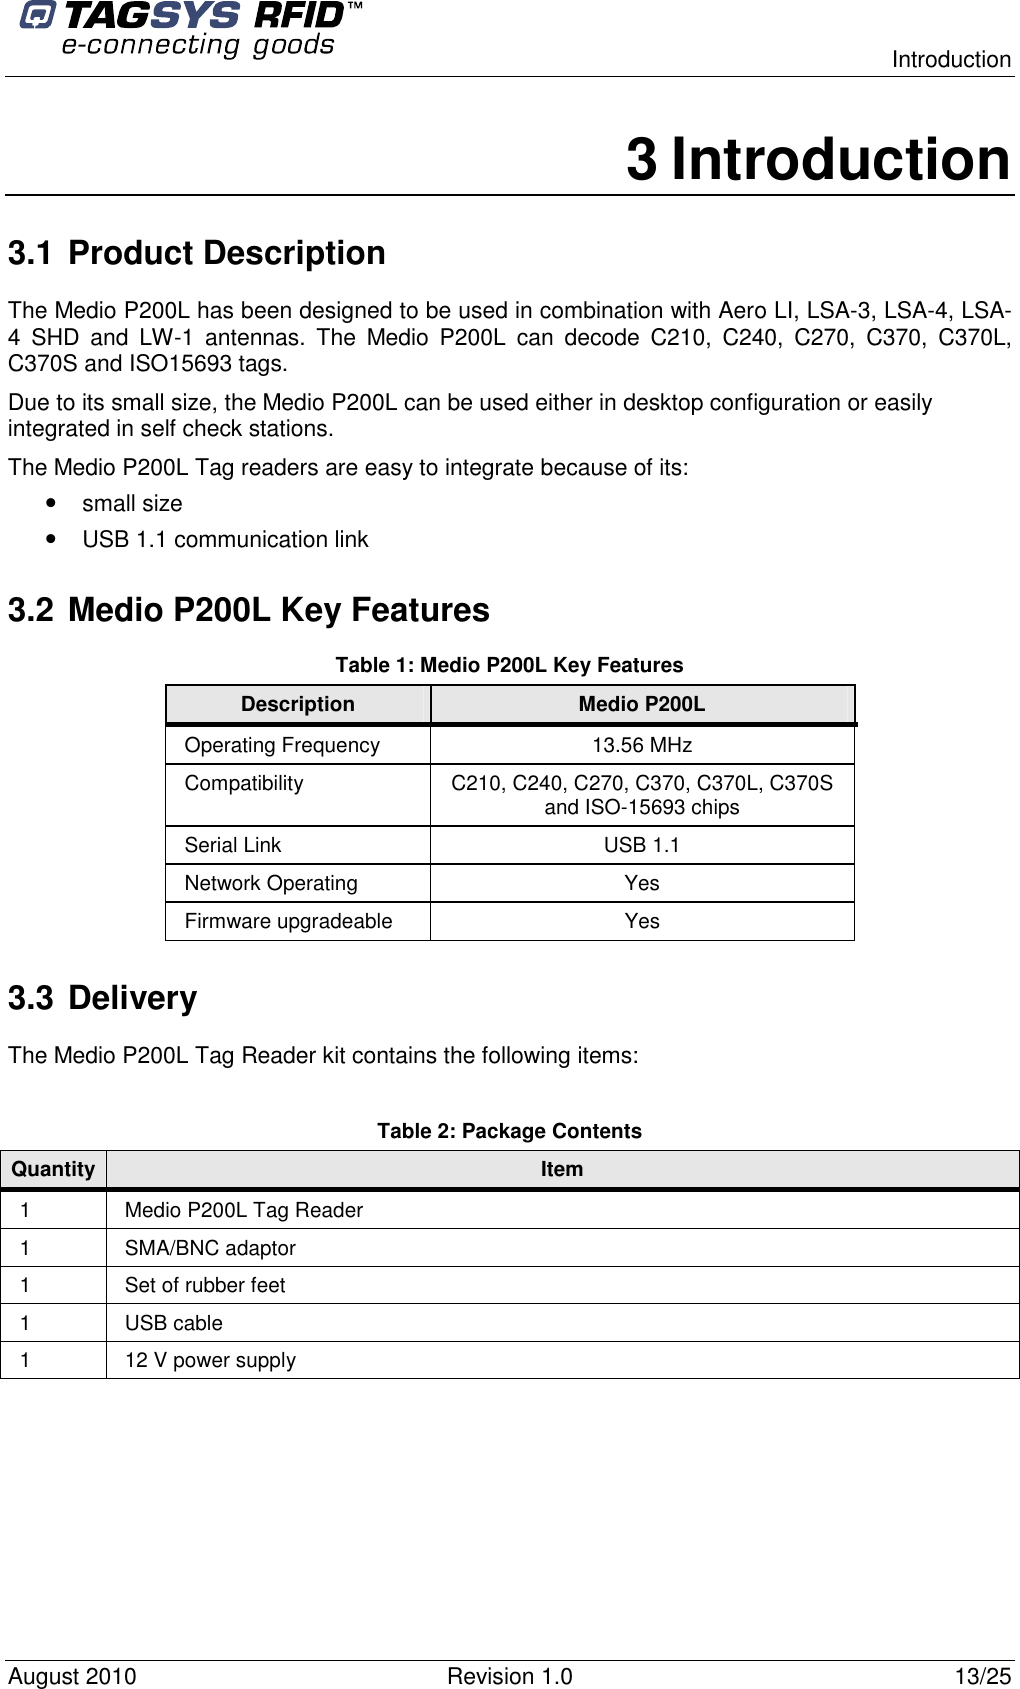  Introduction August 2010  Revision 1.0  13/25 3 Introduction 3.1 Product Description The Medio P200L has been designed to be used in combination with Aero LI, LSA-3, LSA-4, LSA-4  SHD  and  LW-1  antennas.  The  Medio  P200L  can  decode  C210,  C240,  C270,  C370,  C370L, C370S and ISO15693 tags. Due to its small size, the Medio P200L can be used either in desktop configuration or easily integrated in self check stations. The Medio P200L Tag readers are easy to integrate because of its: • small size • USB 1.1 communication link 3.2 Medio P200L Key Features Table 1: Medio P200L Key Features Description  Medio P200L Operating Frequency  13.56 MHz Compatibility  C210, C240, C270, C370, C370L, C370S and ISO-15693 chips Serial Link  USB 1.1 Network Operating  Yes Firmware upgradeable  Yes 3.3 Delivery The Medio P200L Tag Reader kit contains the following items:  Table 2: Package Contents Quantity Item 1  Medio P200L Tag Reader 1  SMA/BNC adaptor 1  Set of rubber feet 1  USB cable 1  12 V power supply 